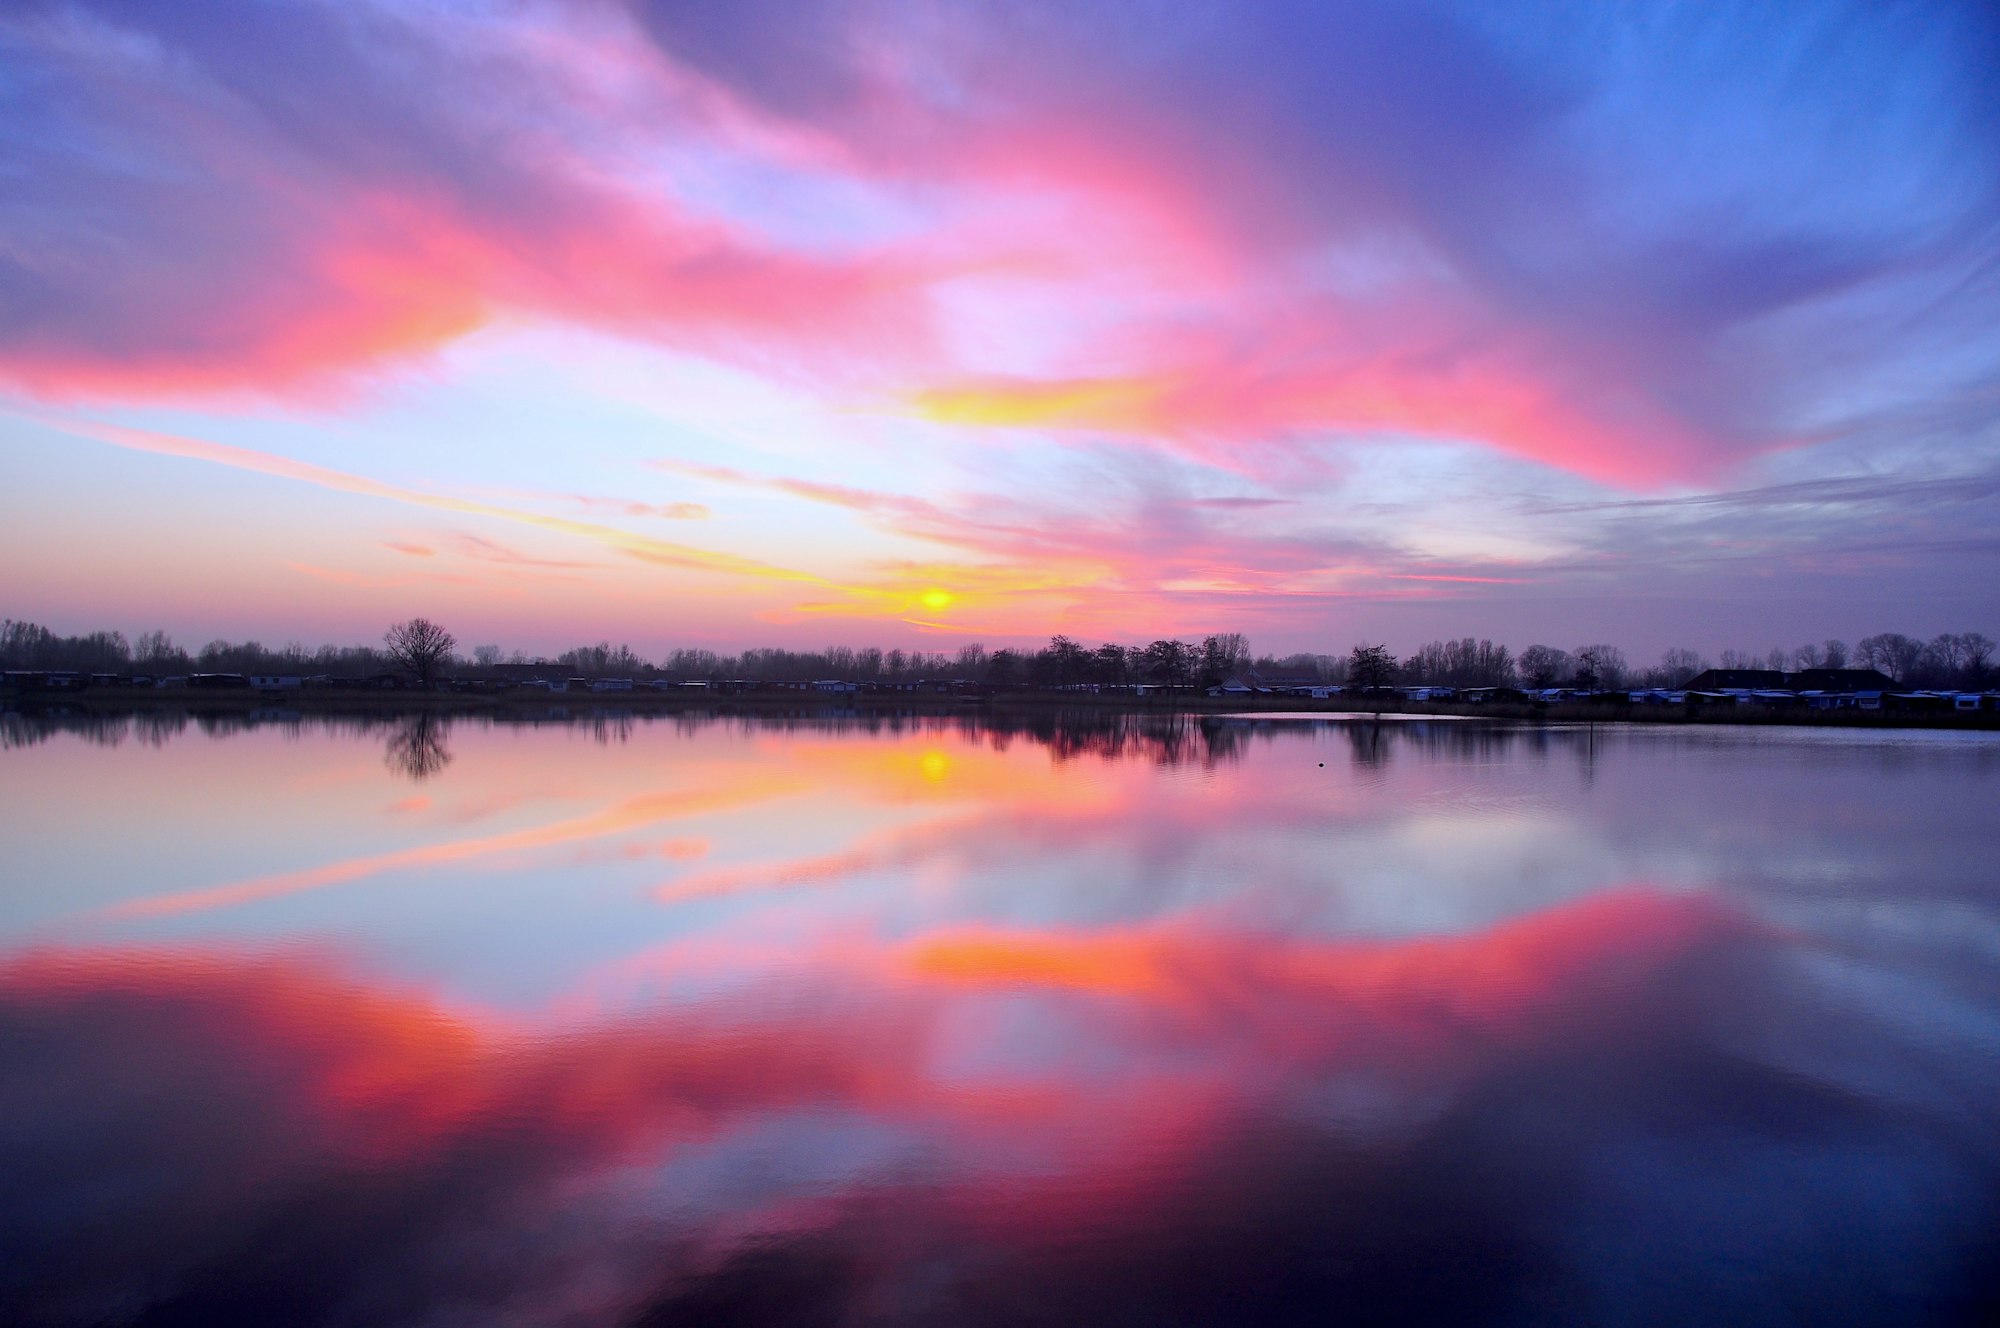 an orange and pink sunrise over a lake with trees on the shoreline in the background